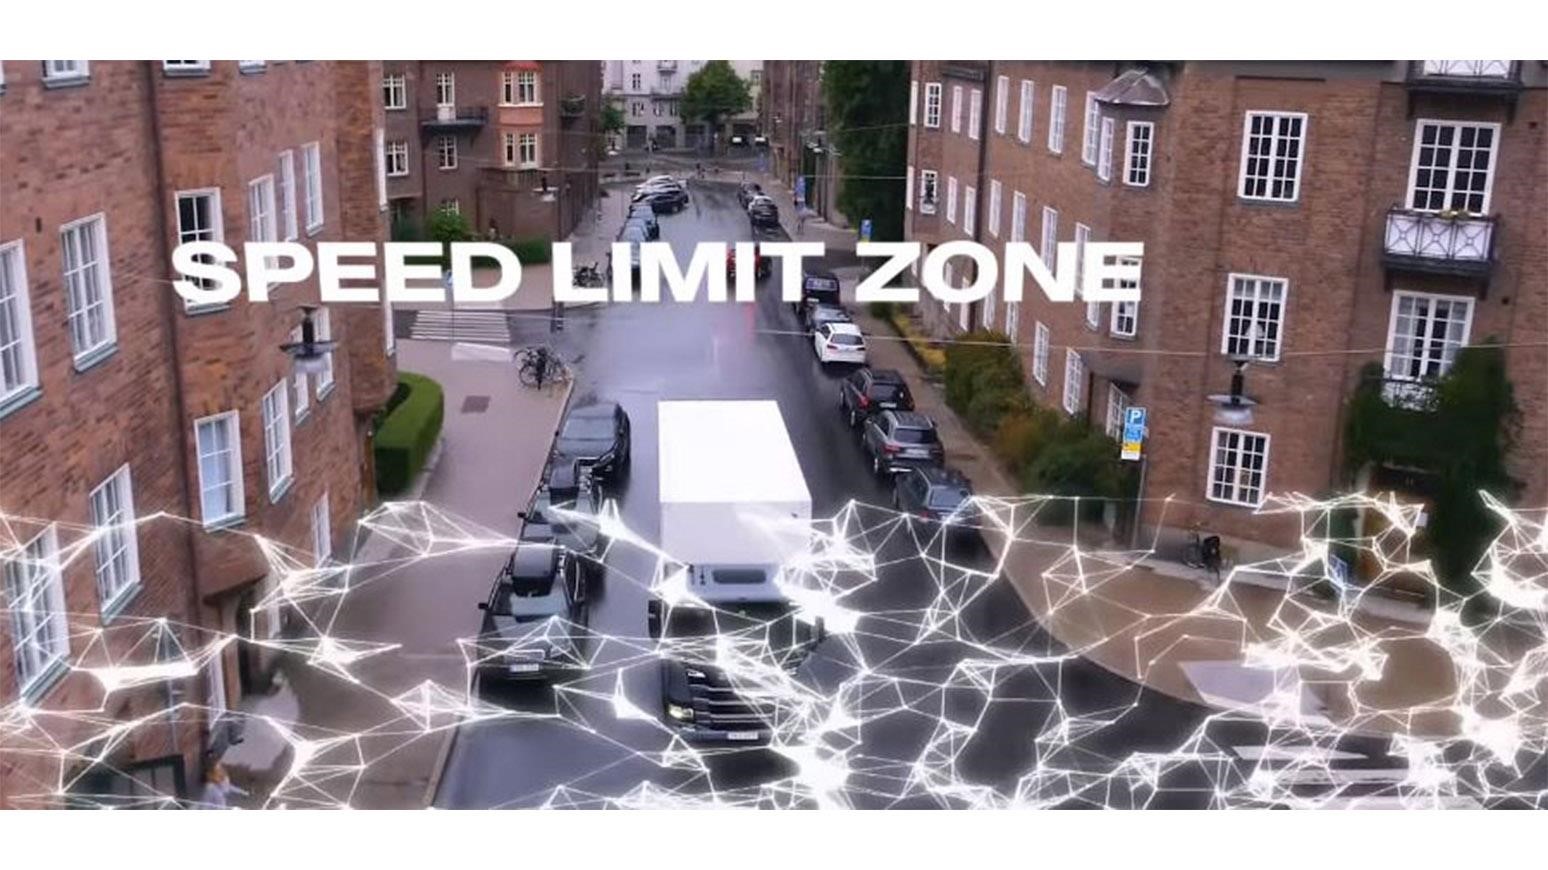 Scania Introduces “Scania Zone” Tool For Meeting Local Speed Limit, Emissions & Noise Regulations